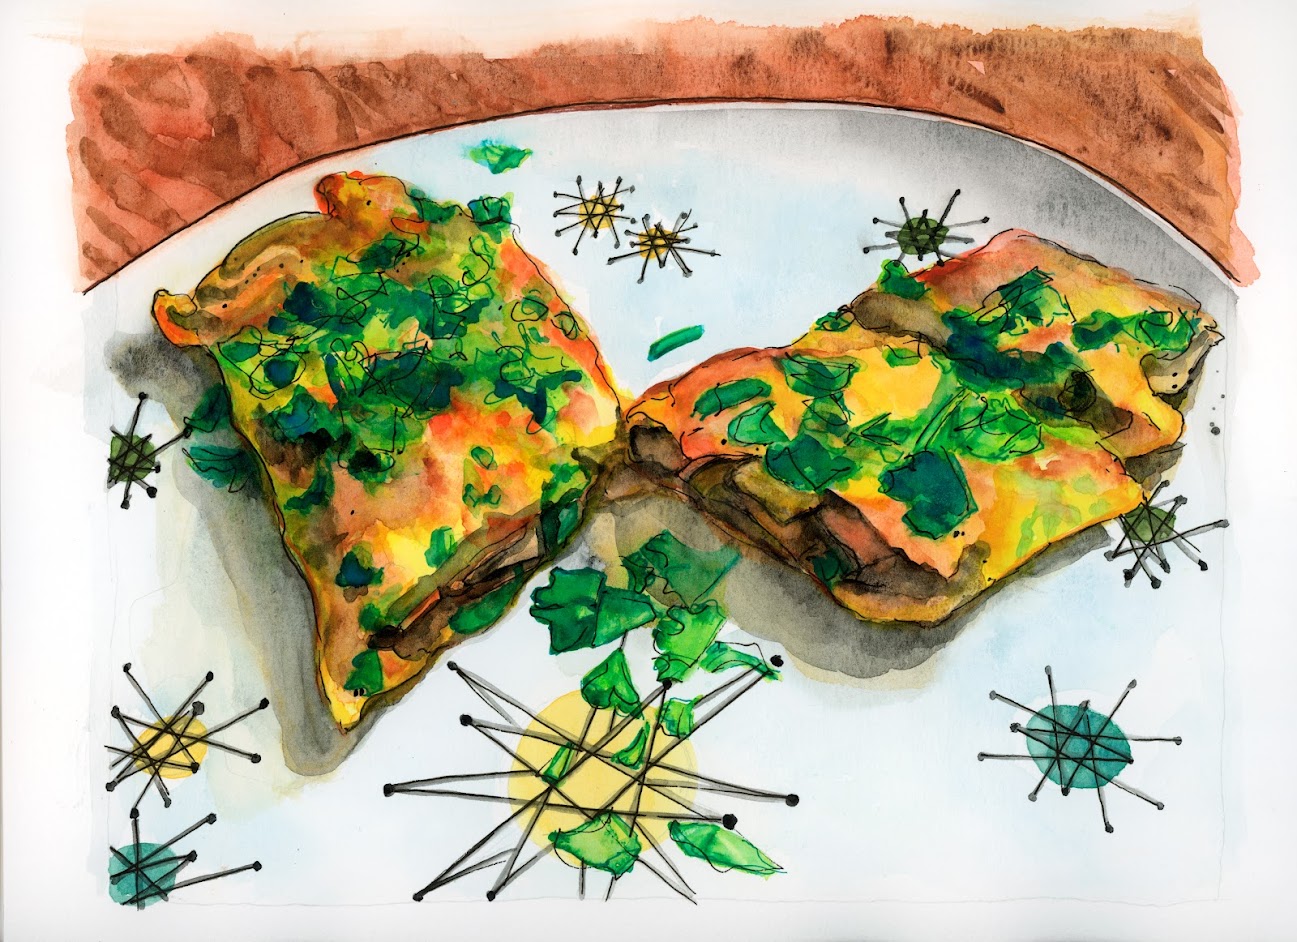 A gesturally painted illustration of a golden-colored savory crepe cut in half and garnished with chopped cilantro. The jian bing is served on a white plate featuring a mod starburst design pattern. A fragment of a wood table is visible under the plate.